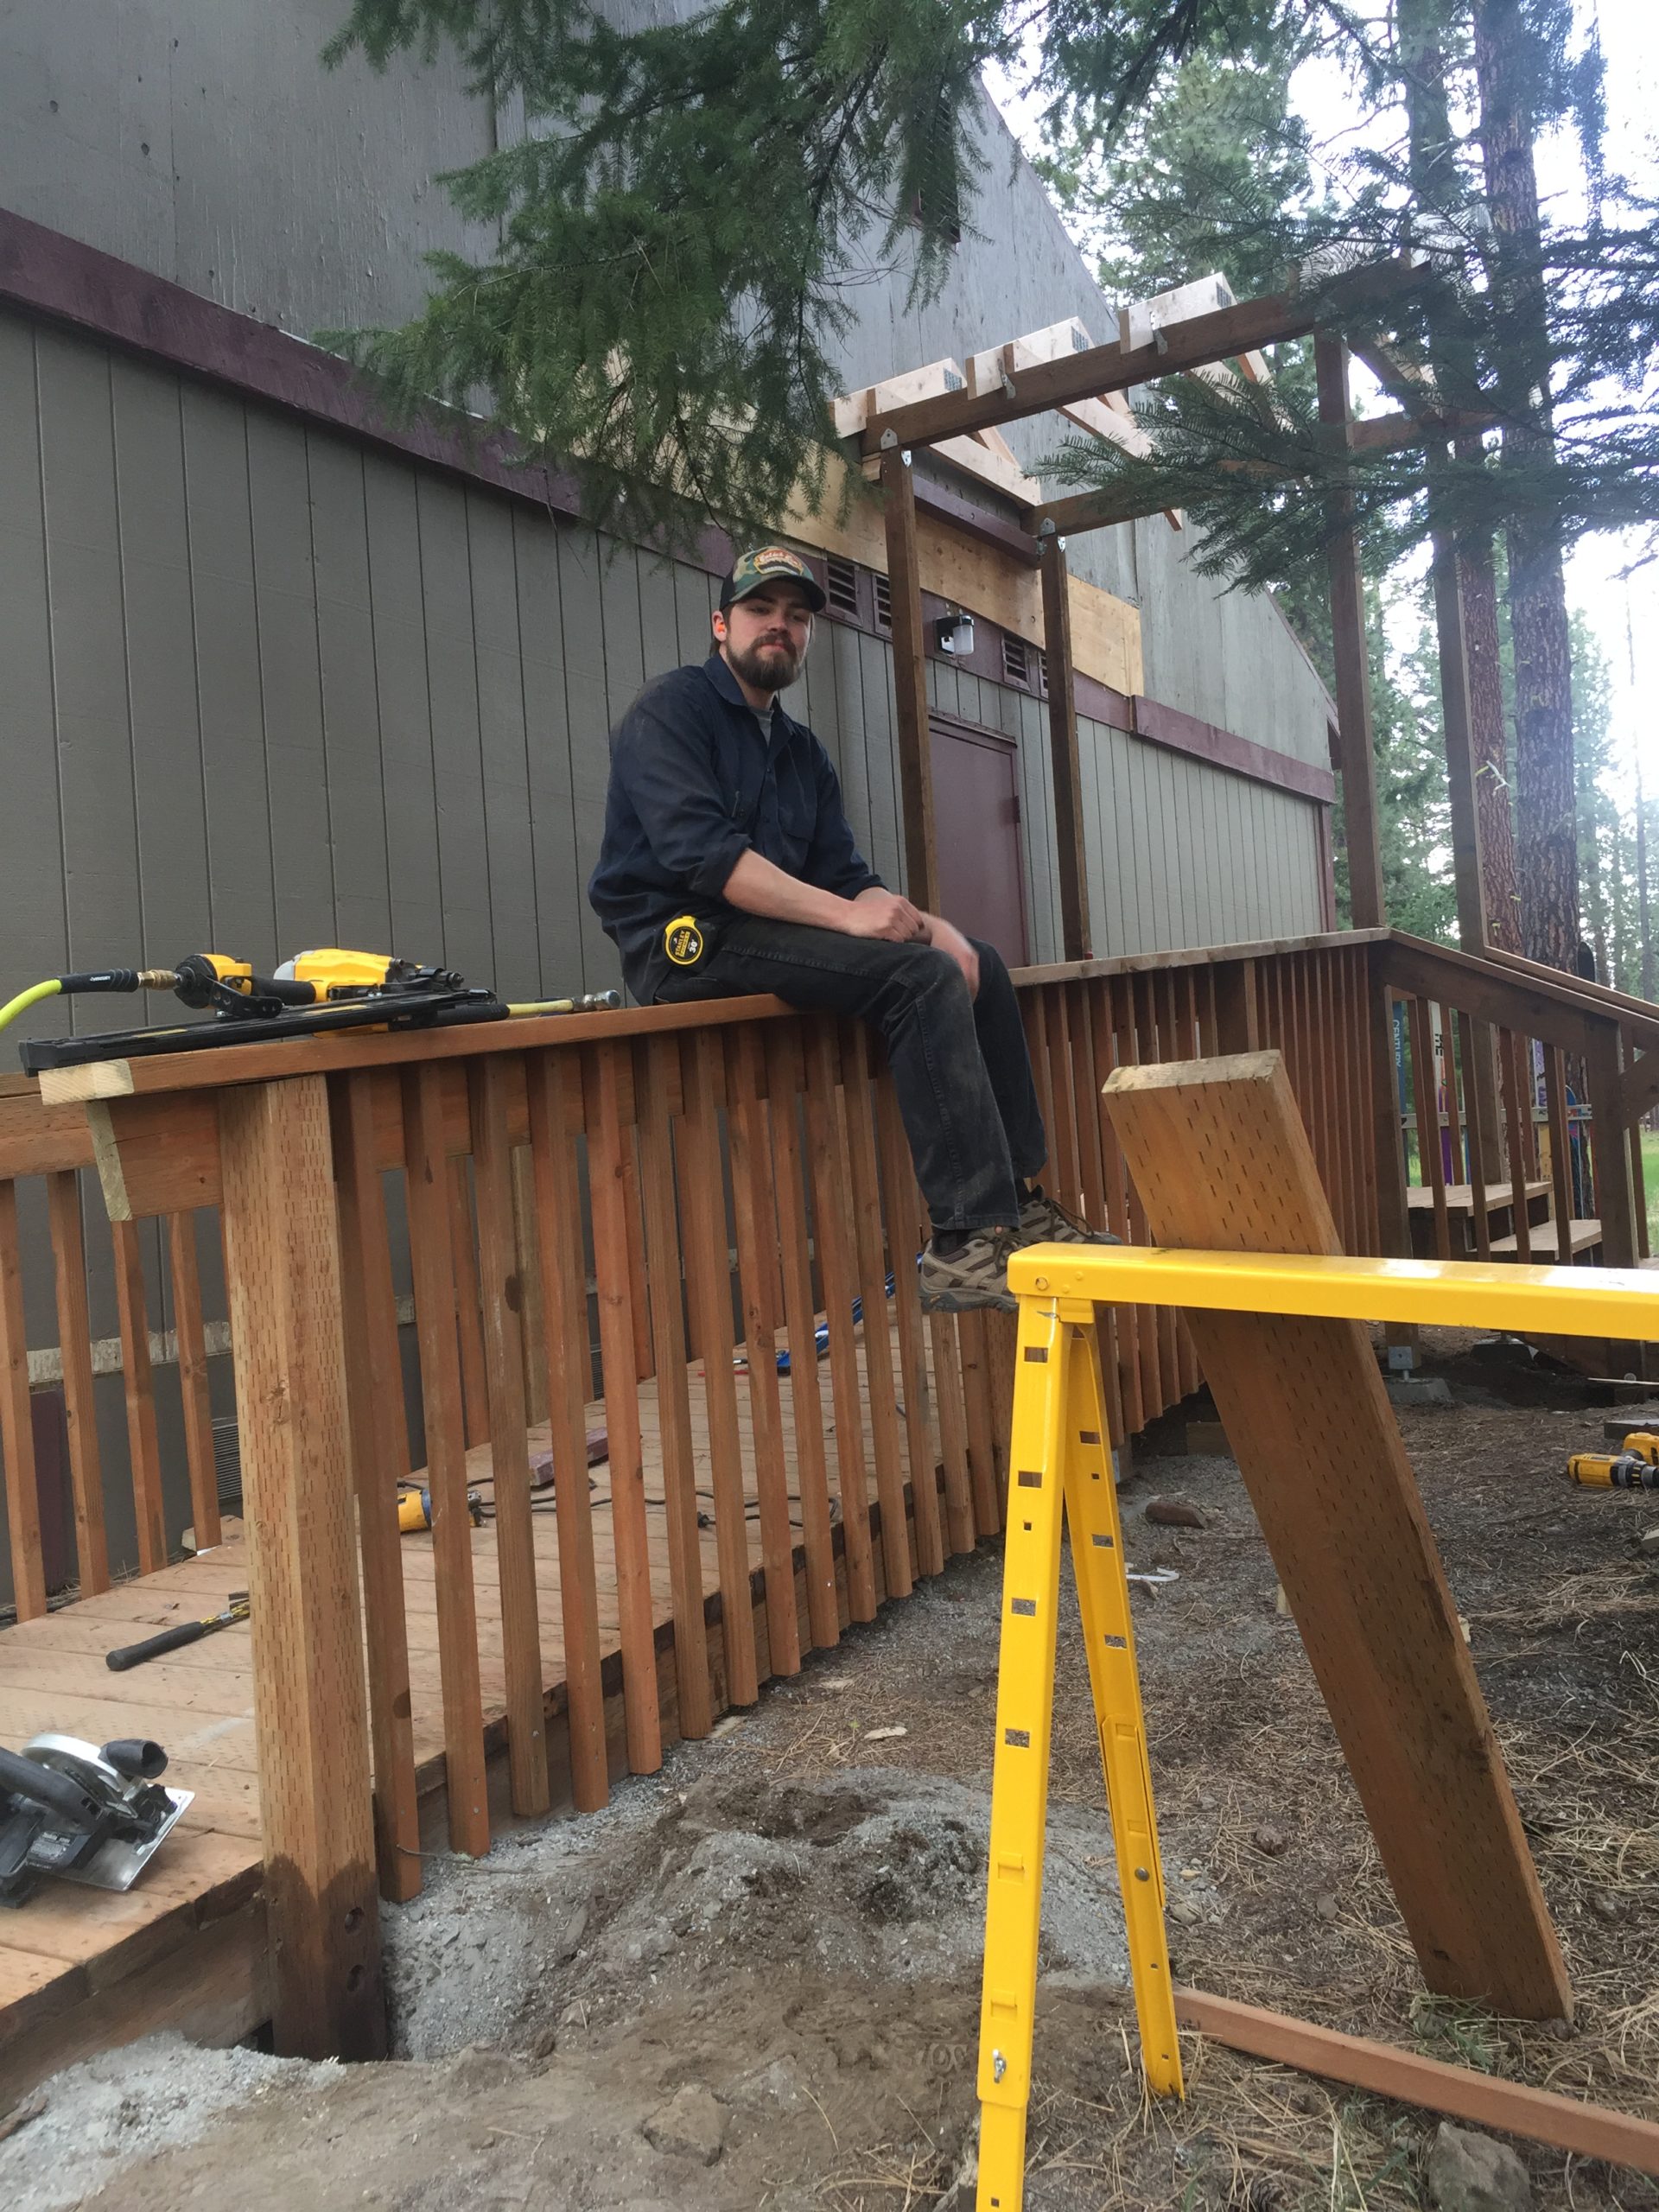 VetsWork: Working in a Facilities Position with the Forest Service